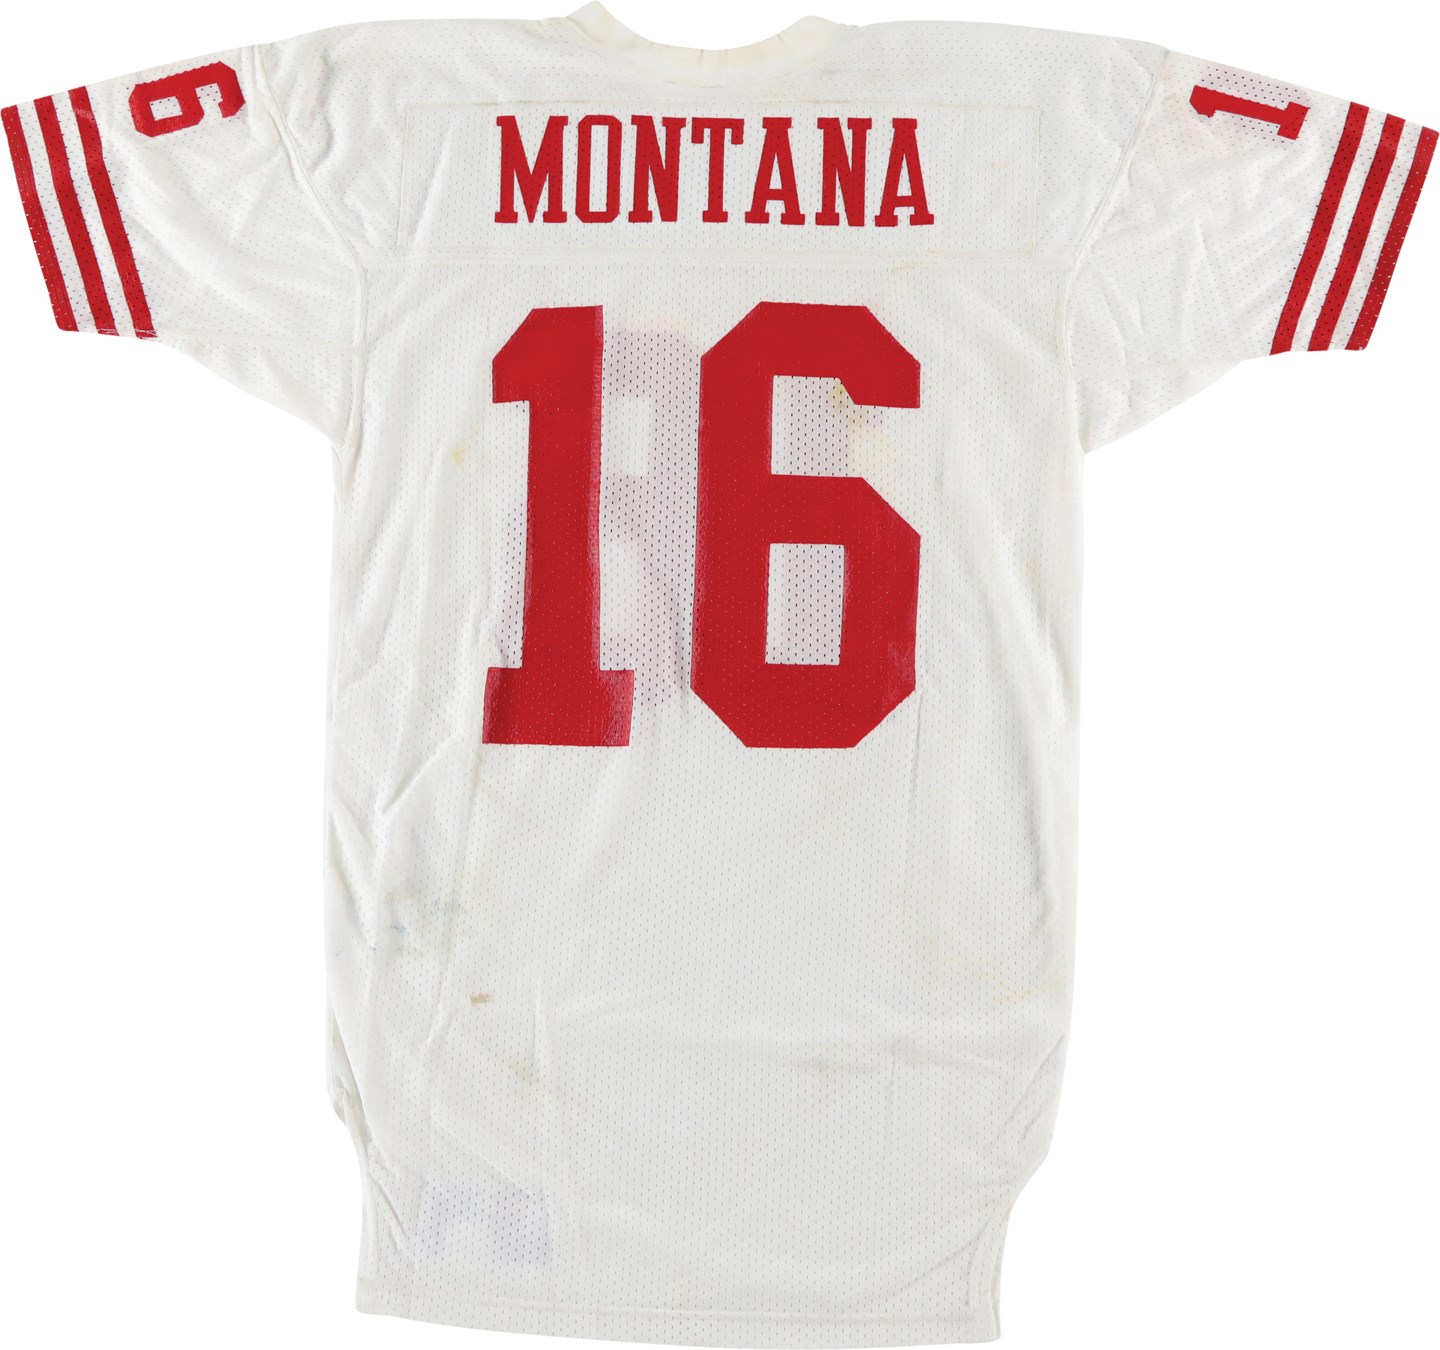 - storic 12/11/89 Joe Montana Record-Breaking San Francisco 49ers vs. Rams MNF Signed Game Worn Jersey - Montana Throws TWO 90+ Touchdowns & Second Highest Passing Yards Game of His Career (Sports Investors Photo-Matched LOA & Family Sourced)